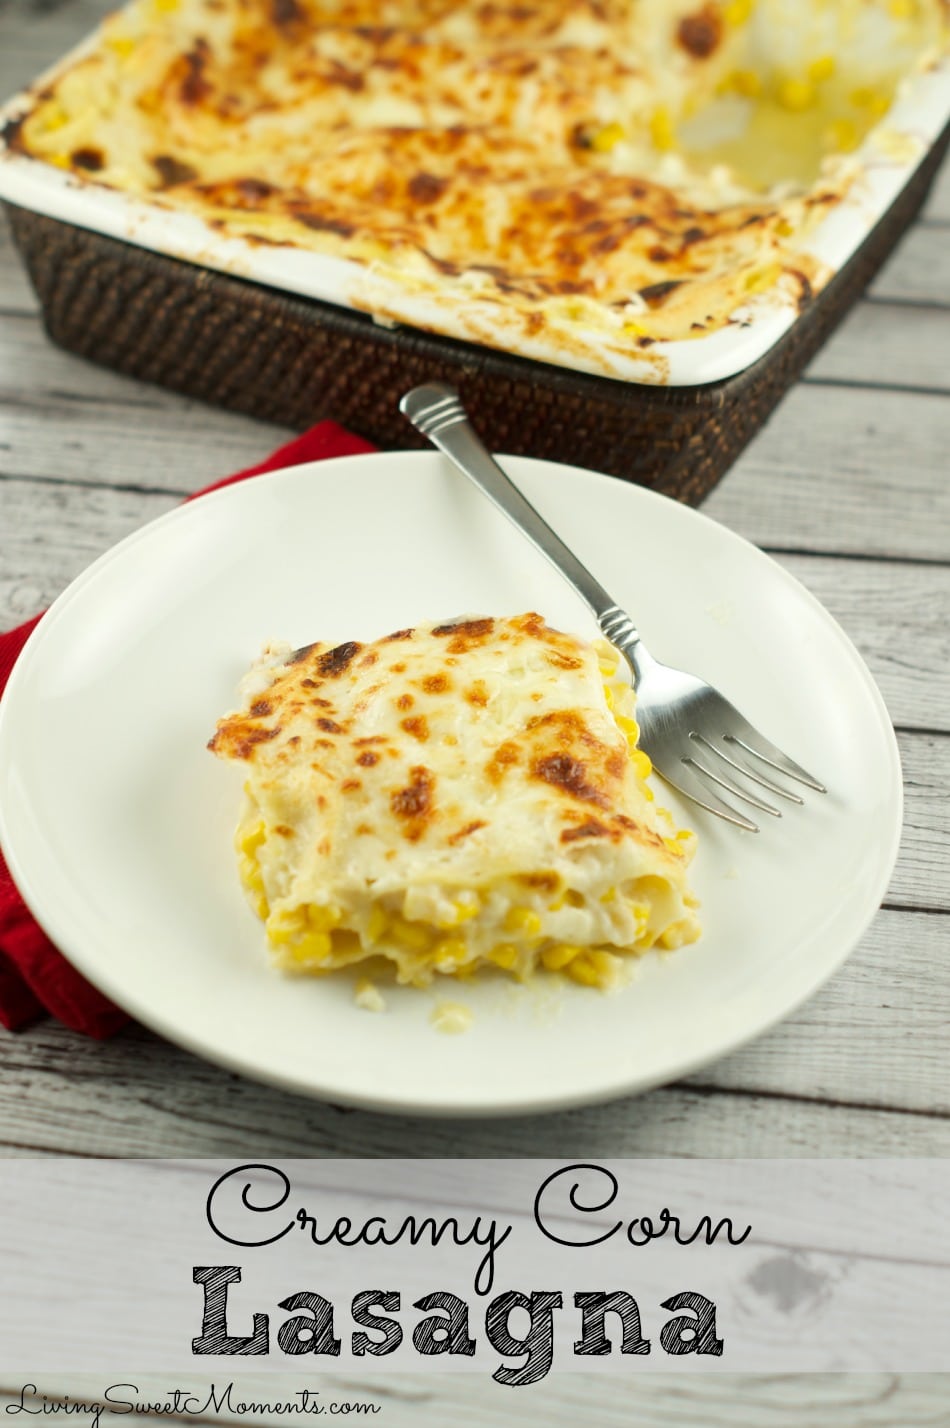 This Creamy Corn Lasagna Recipe is very easy to make and definitely a crowd pleaser. Savor layers of bechamel, pasta, cheese and corn. Perfect side dish.